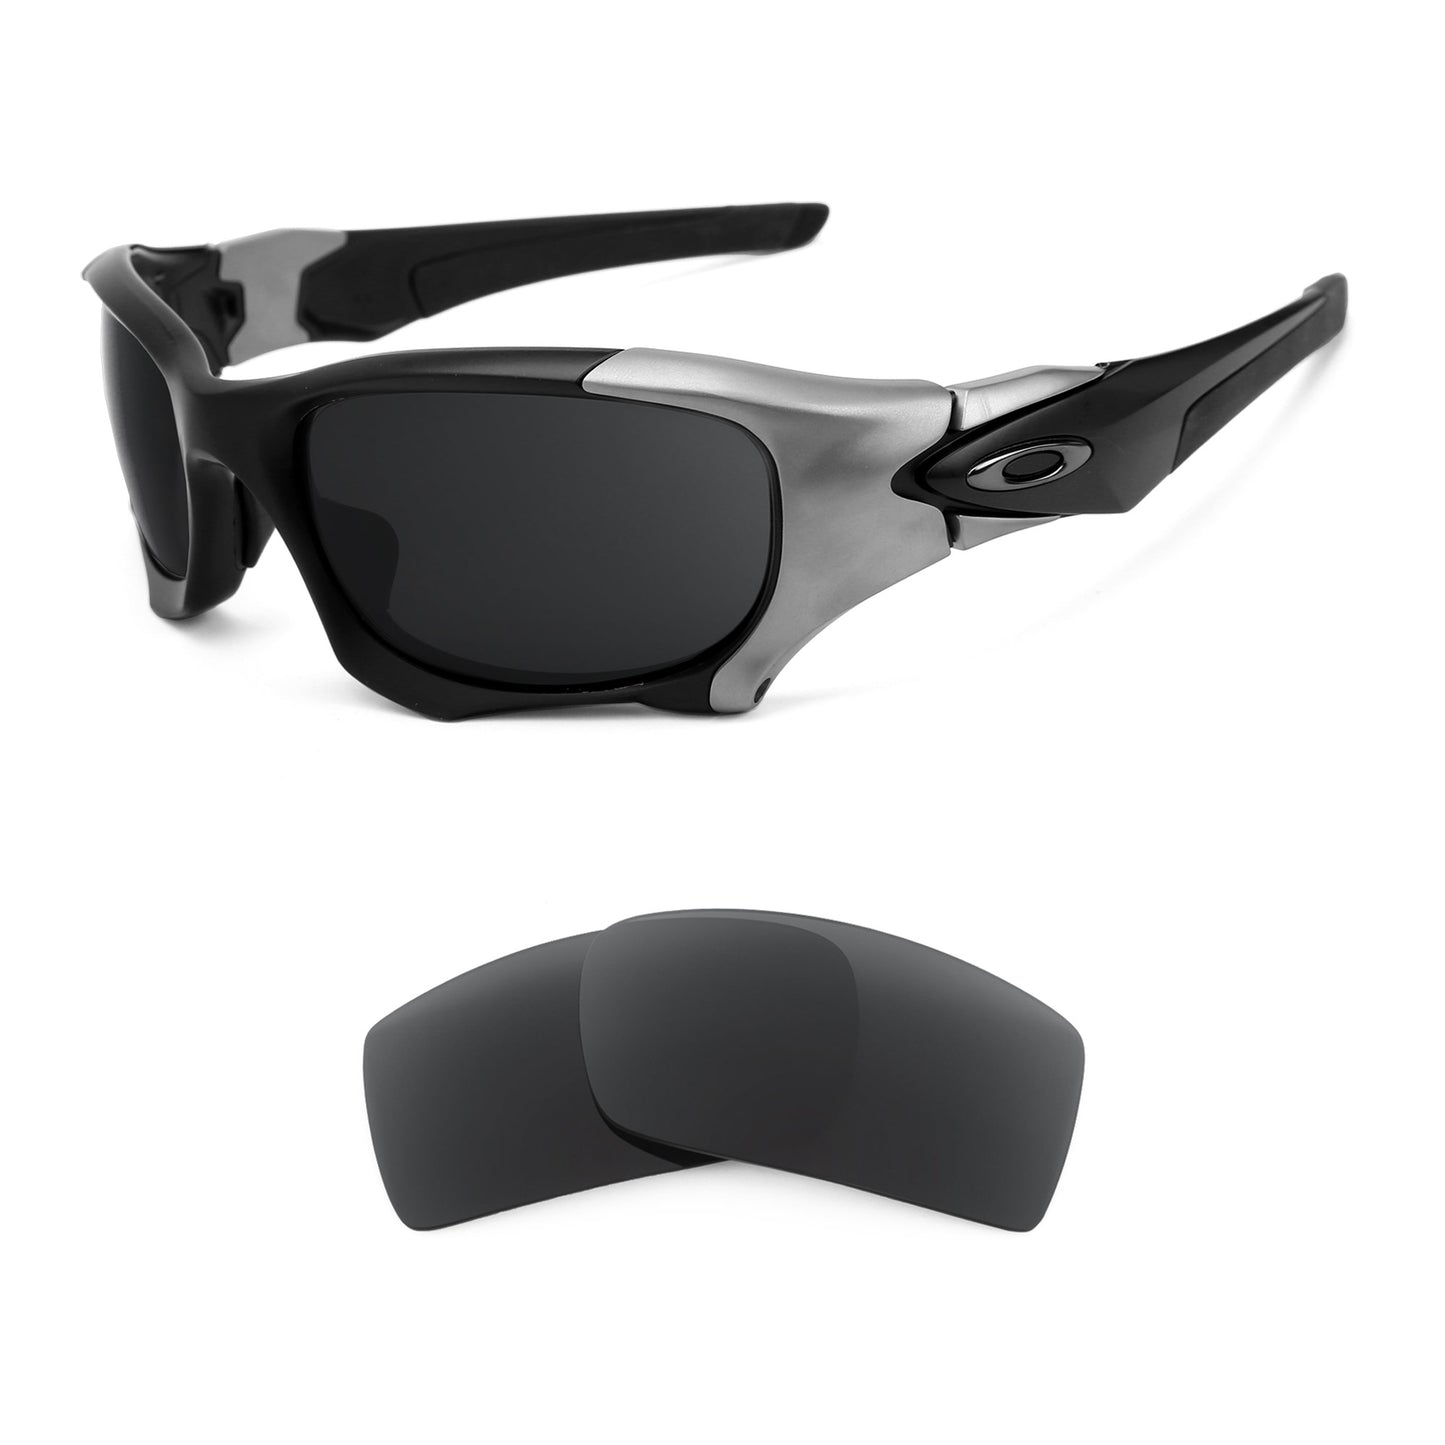 Oakley Pit Boss II sunglasses with replacement lenses